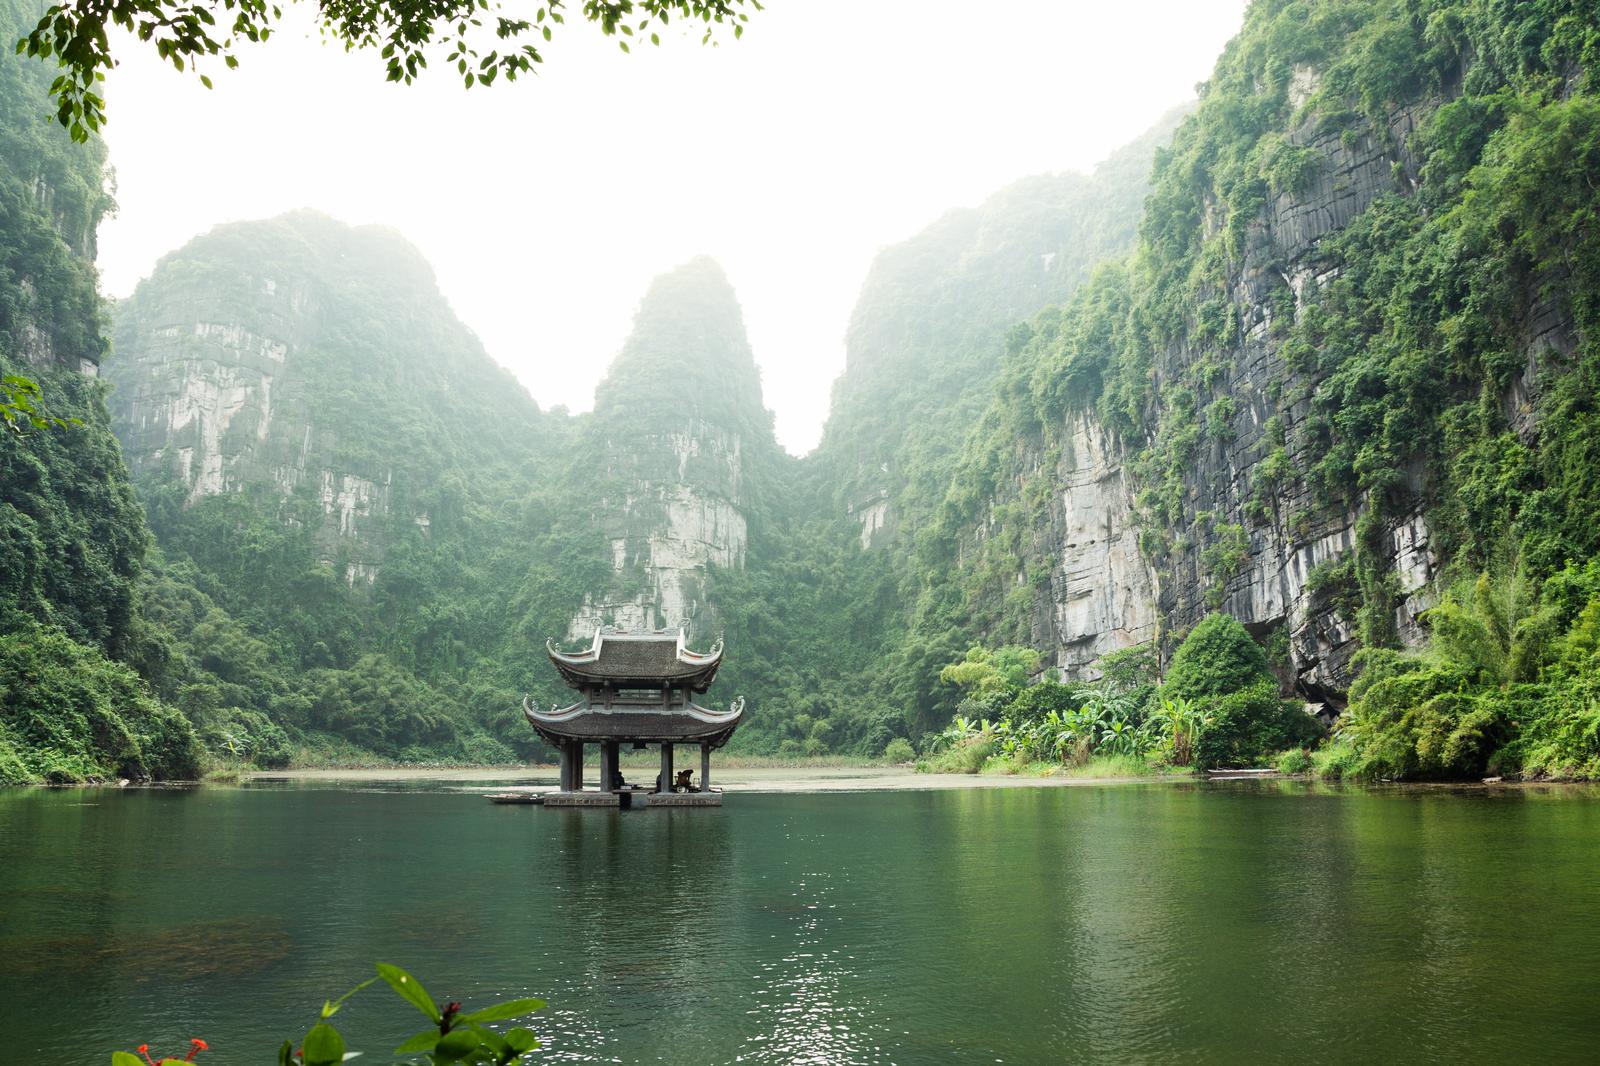 🗽 What Famous Landmark Should You Visit Next Based on Your A-Z Travel Bucket List? Vietnam